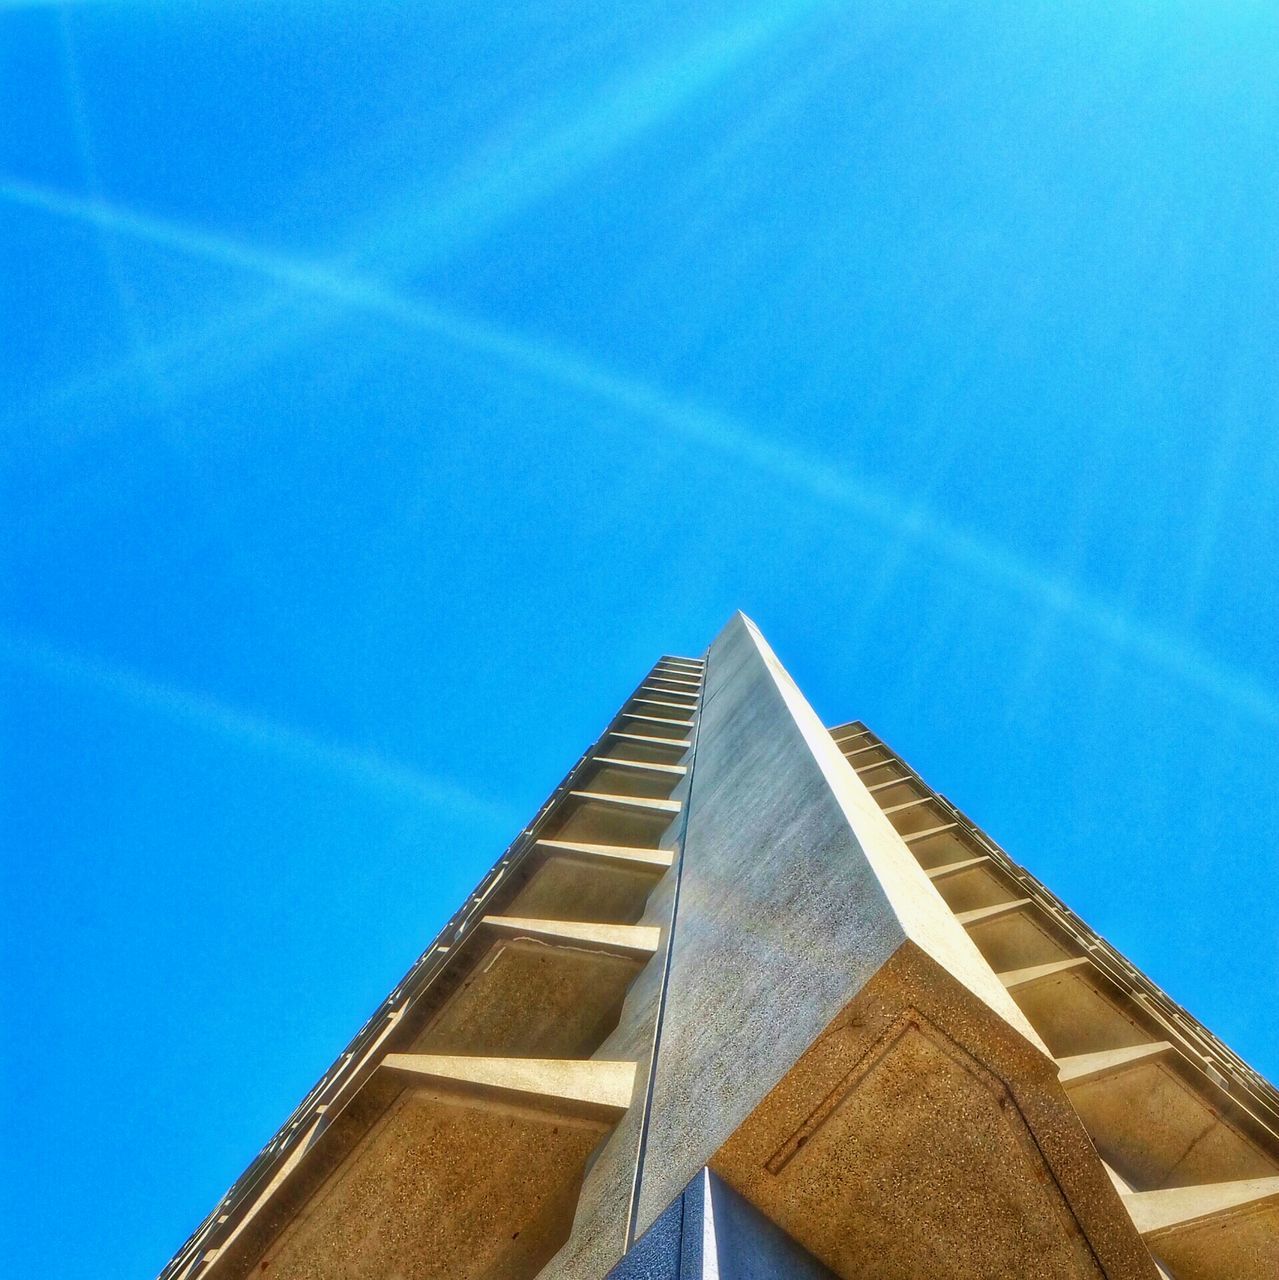 low angle view, architecture, blue, built structure, building exterior, clear sky, sky, sunlight, modern, day, outdoors, tall - high, high section, no people, building, tower, city, copy space, pattern, architectural feature